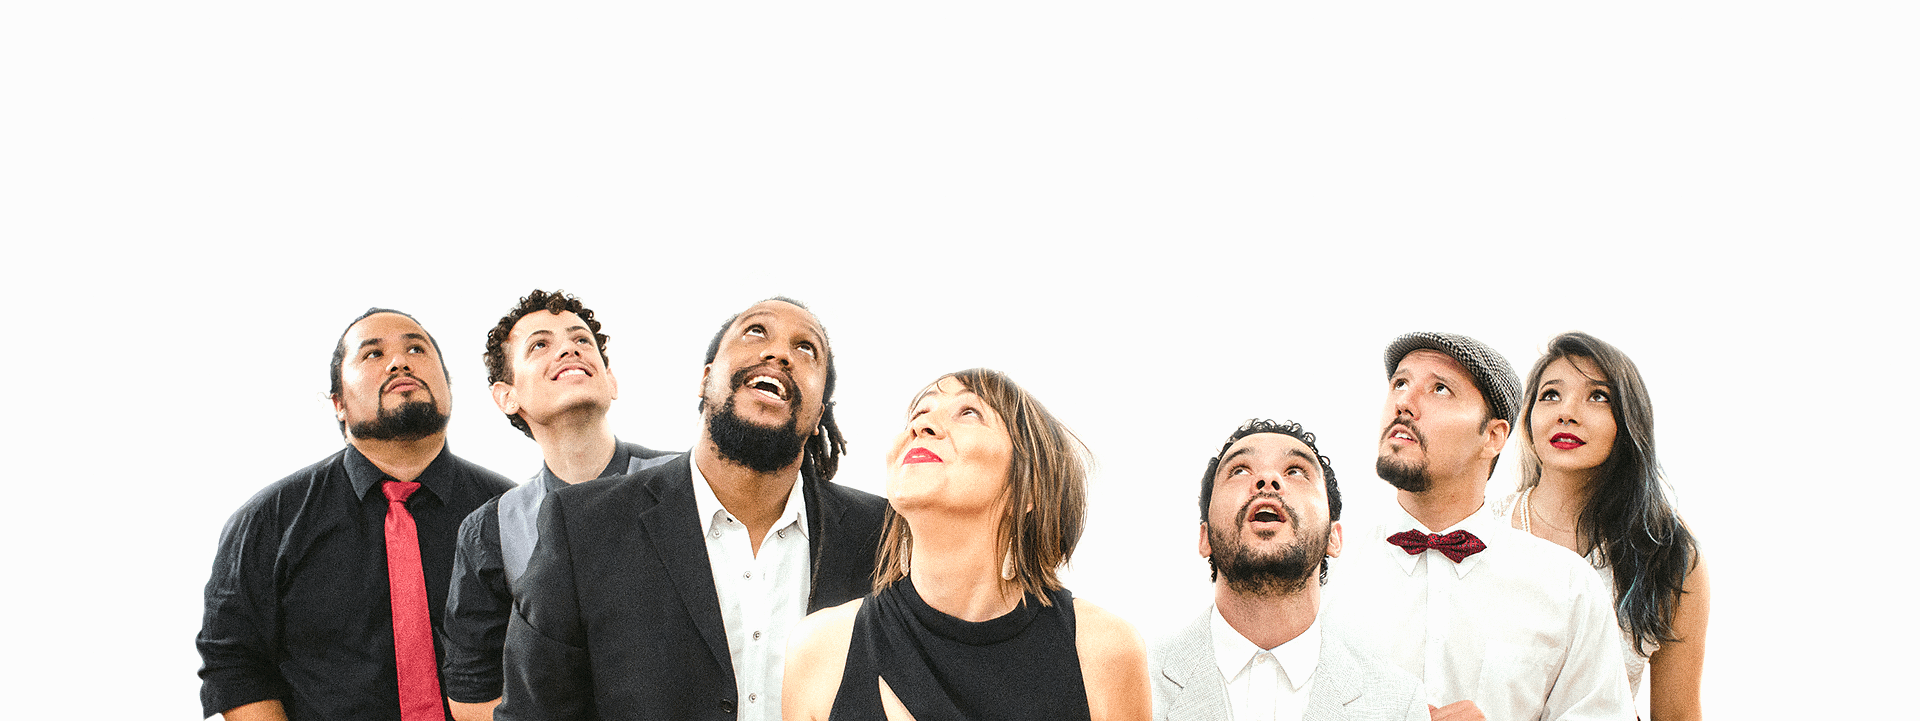 Color photo of 7 artists, five men and two women, looking up with hopeful faces. Above the photo, the title "4 por 4 escuta essa dança”.